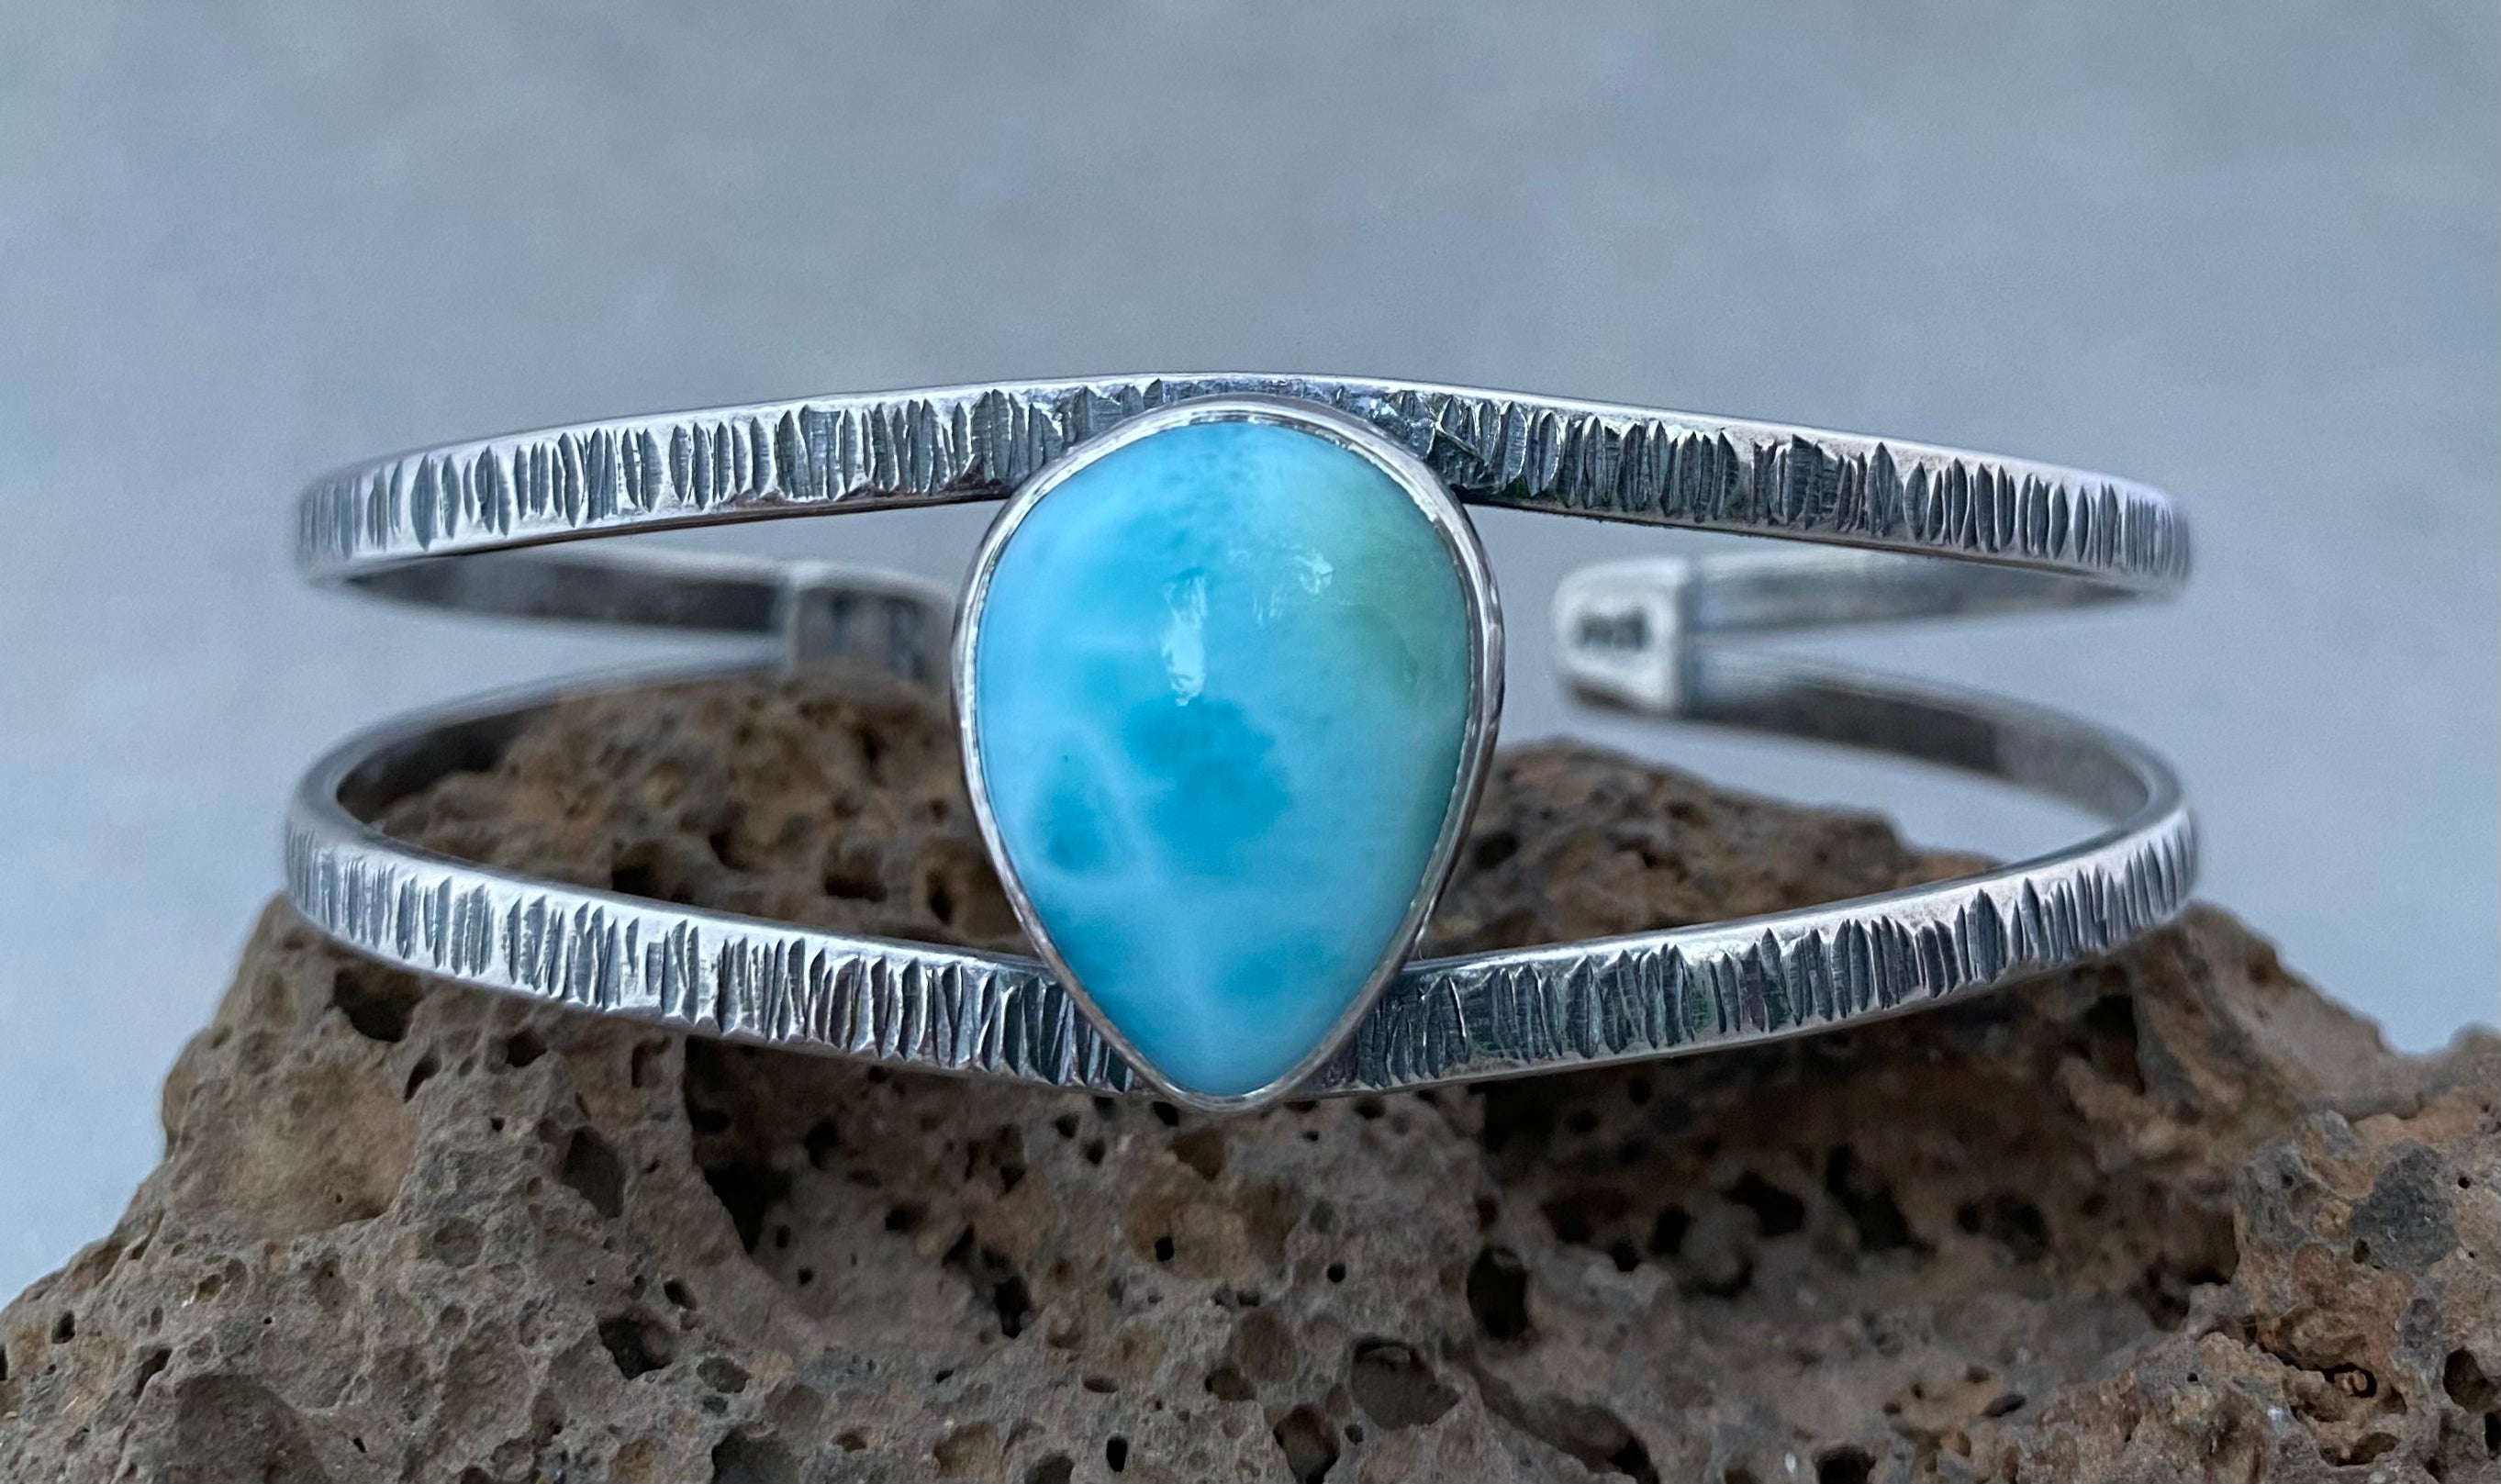 Hammered Sterling Silver Cuff Bracelet with Larimar